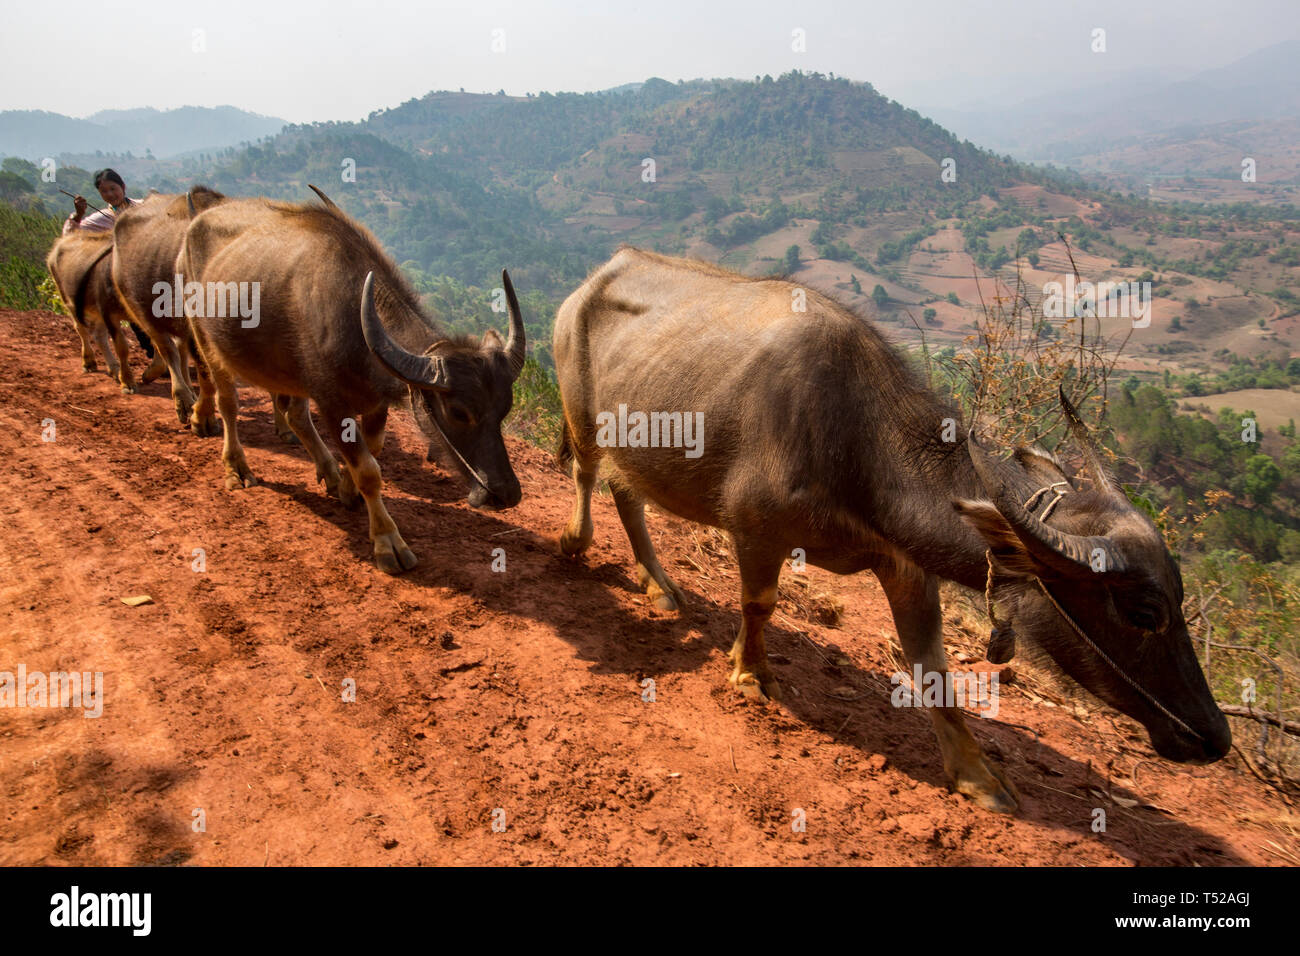 Shan woman walking with some water buffalo on a track near Shan State, Photo Alamy